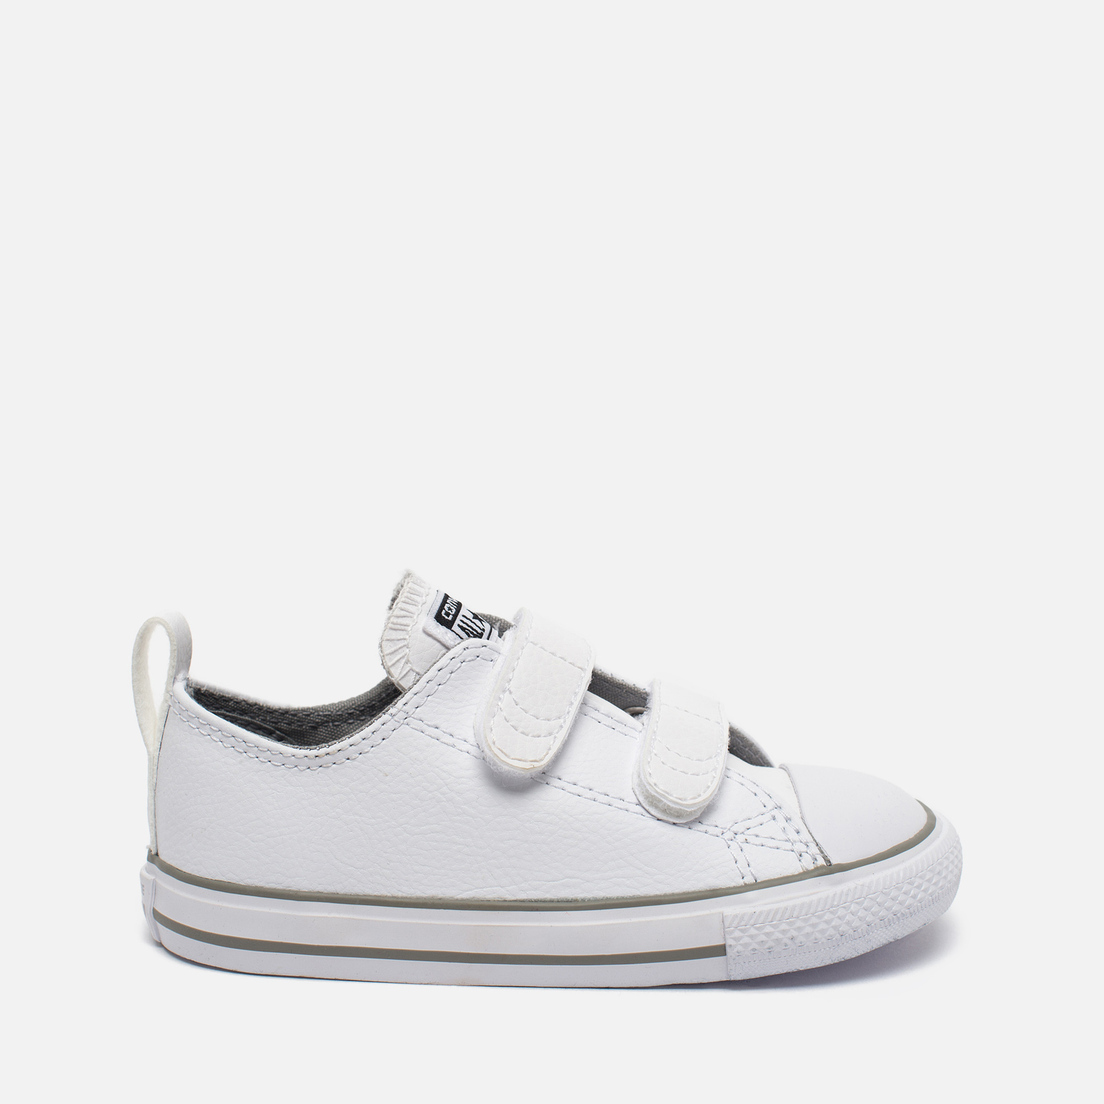 Converse Детские кеды Chuck Taylor All Star 2V Leather Toddler Low Top